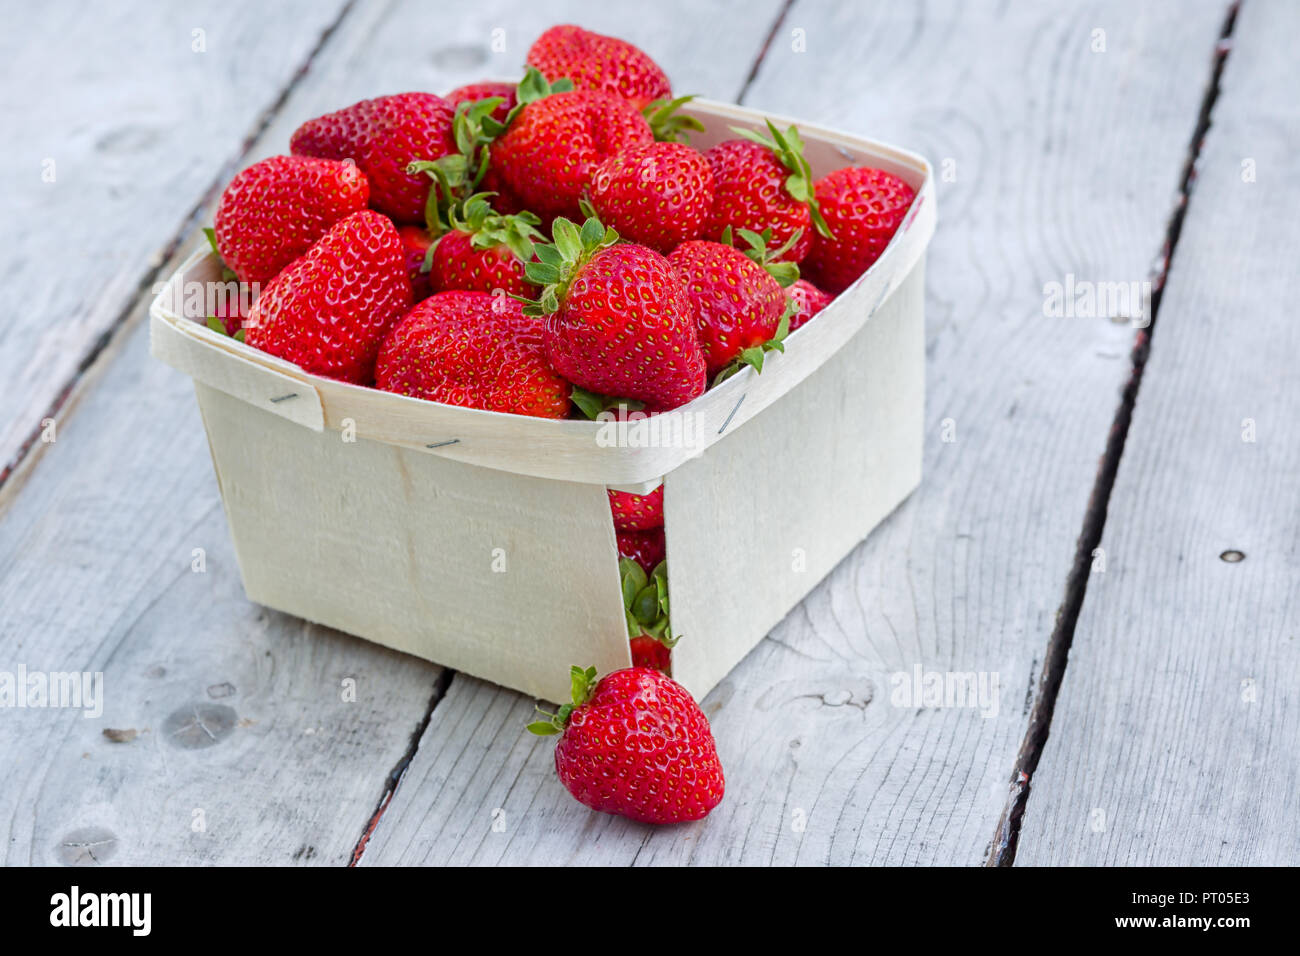 Box of freshly picked ripe red strawberries on a wooden table. Stock Photo